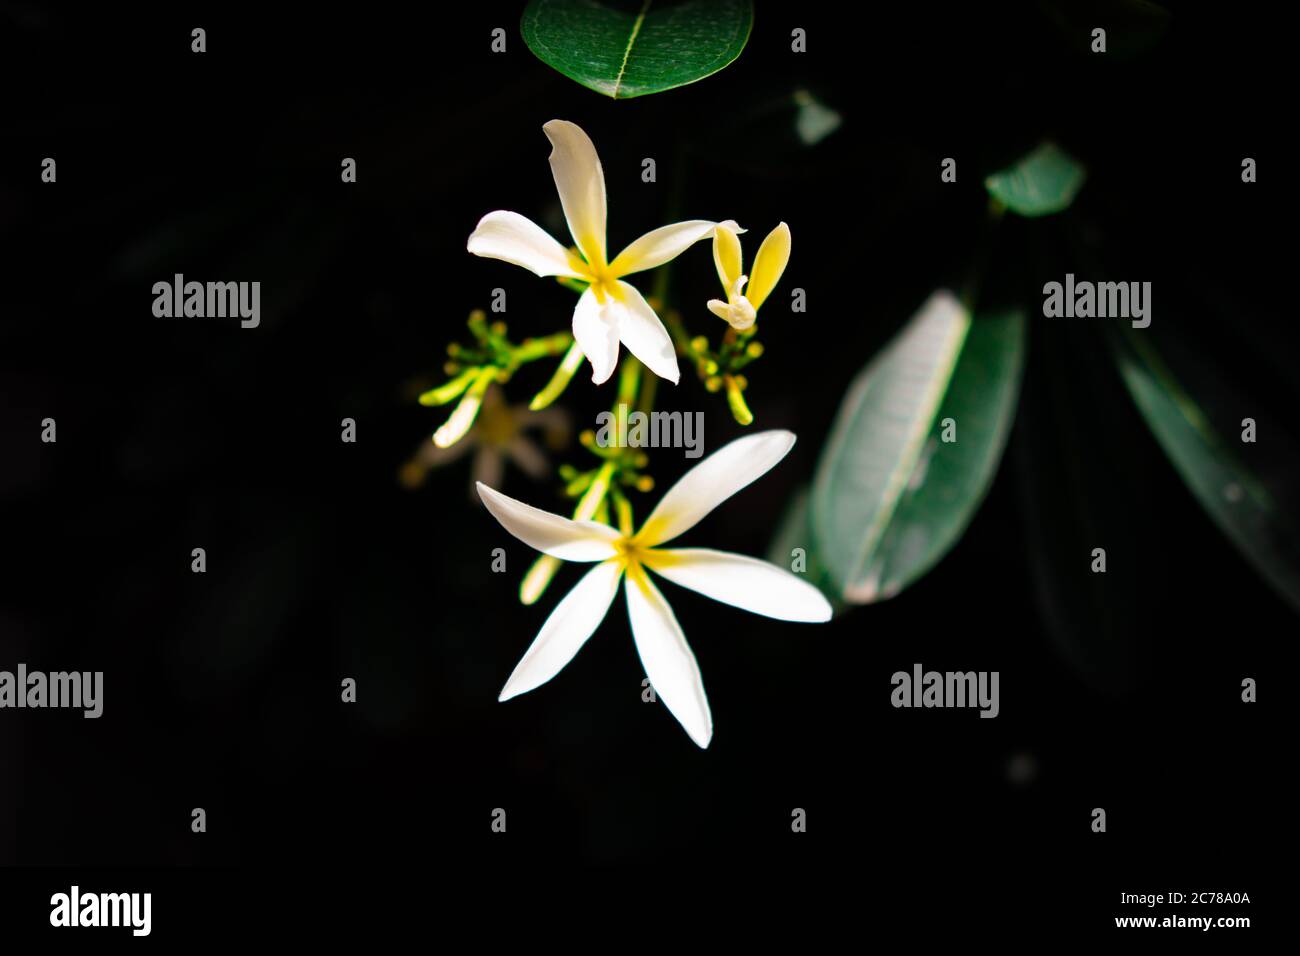 White fragrant flower with green leaves in a completely dark background. Frangipani flower is known as Plumeria flower. Stock Photo